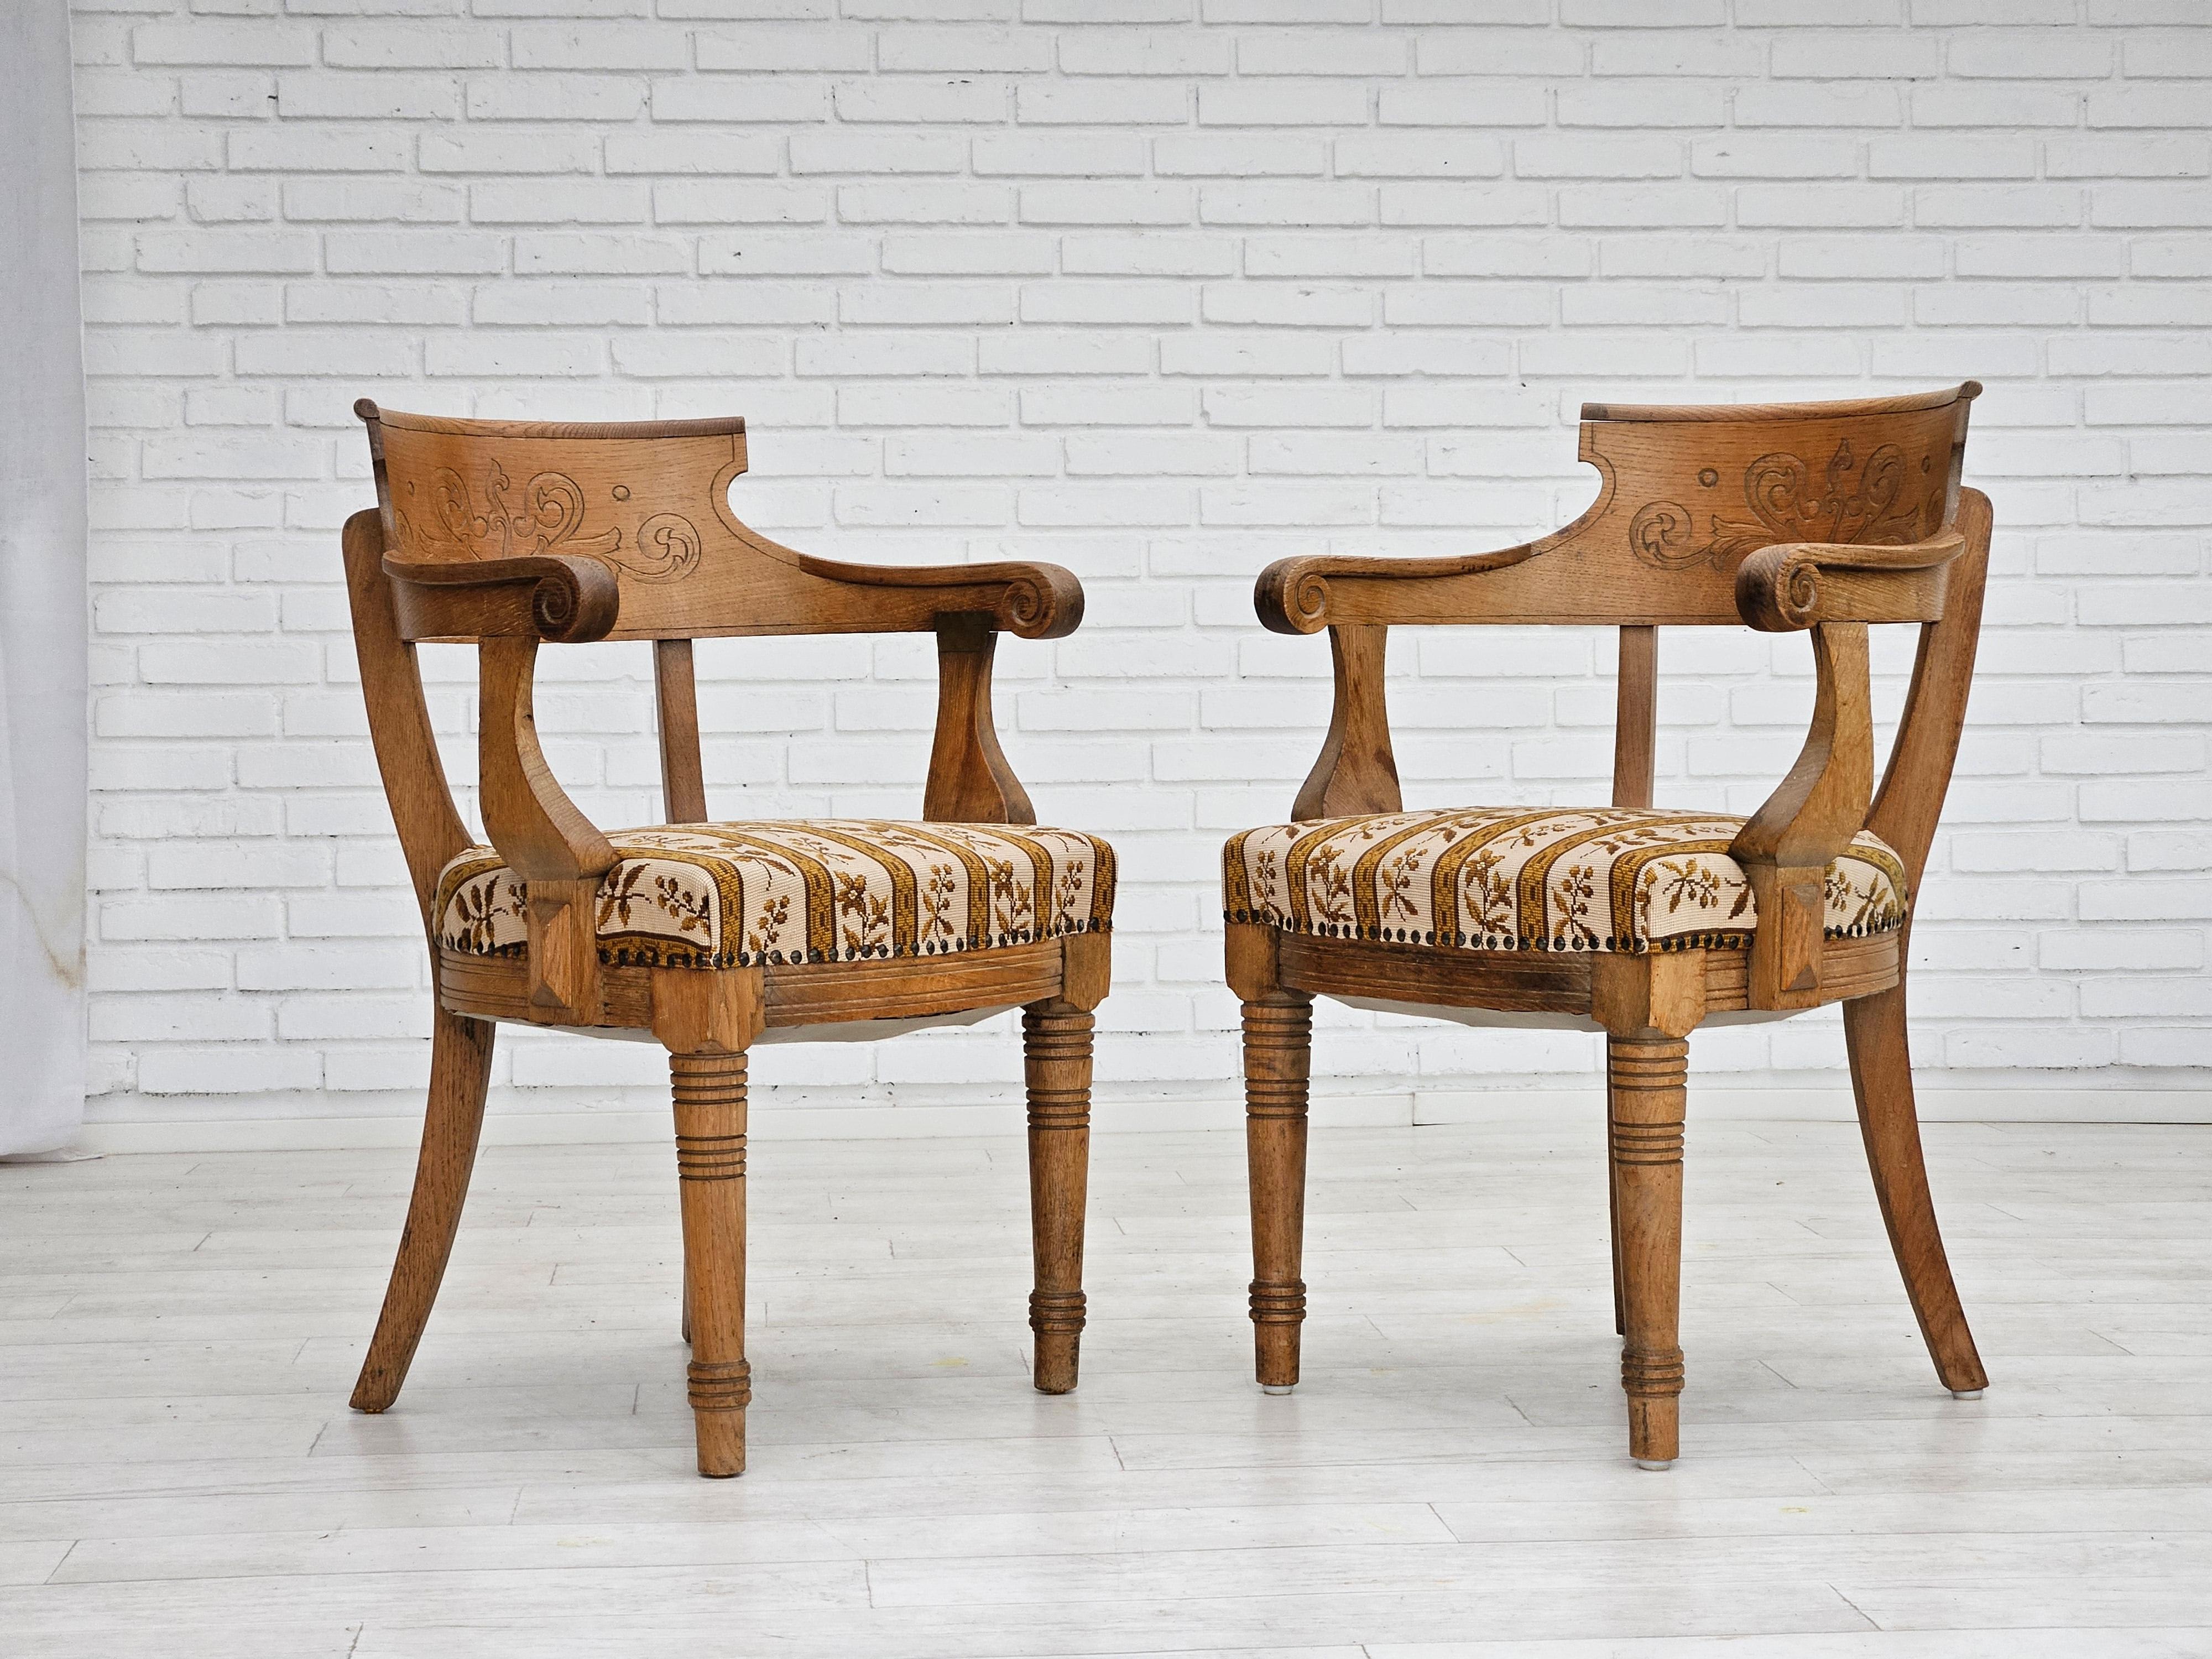 1940-50s, Danish design. Pair of two armchairs in original very good condition: no smells and no stains. Oak wood, furniture wool. Hand carved back. Manufactured by Danish furniture manufacturer in about 1950.